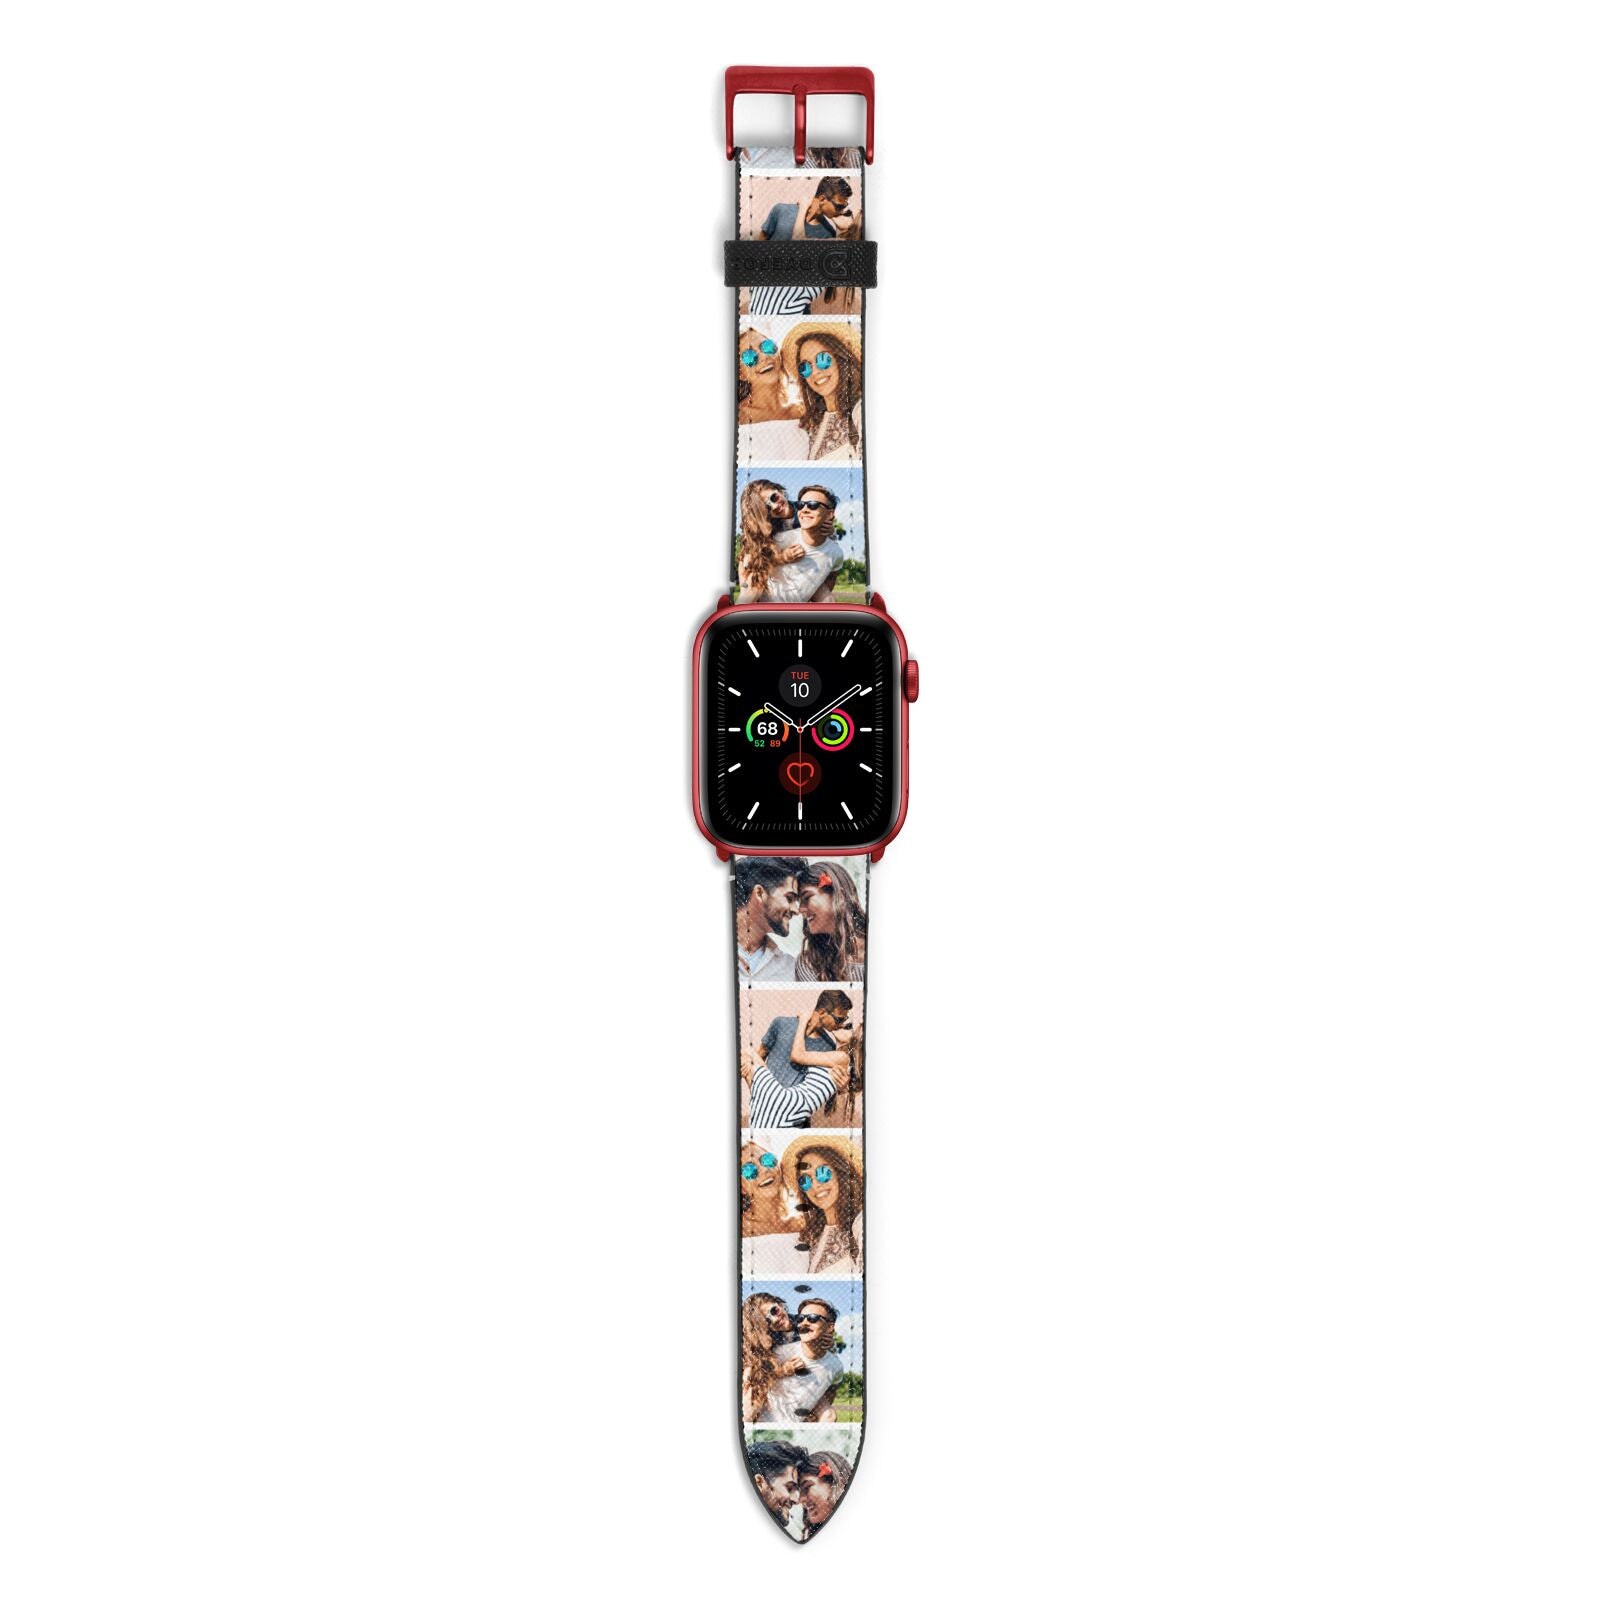 Photo Strip Montage Upload Apple Watch Strap with Red Hardware